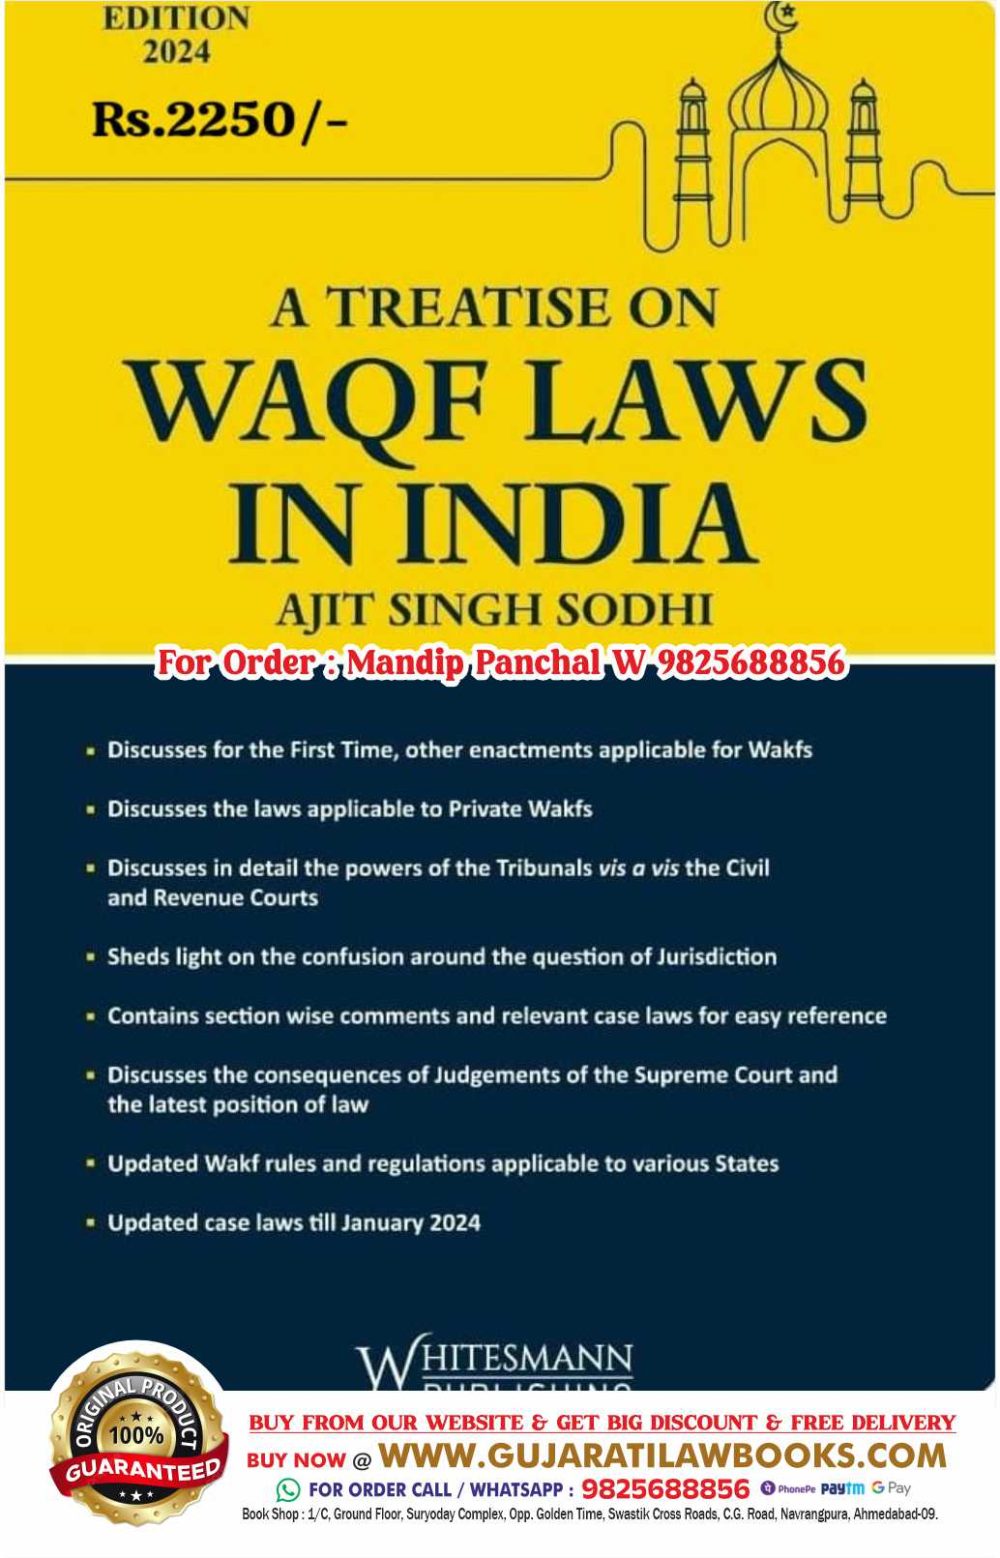 A Treatise on WAQF LAWS IN INDIA by Ajit Singh Sodhi - Latest March 2024 Edition Whitesmann